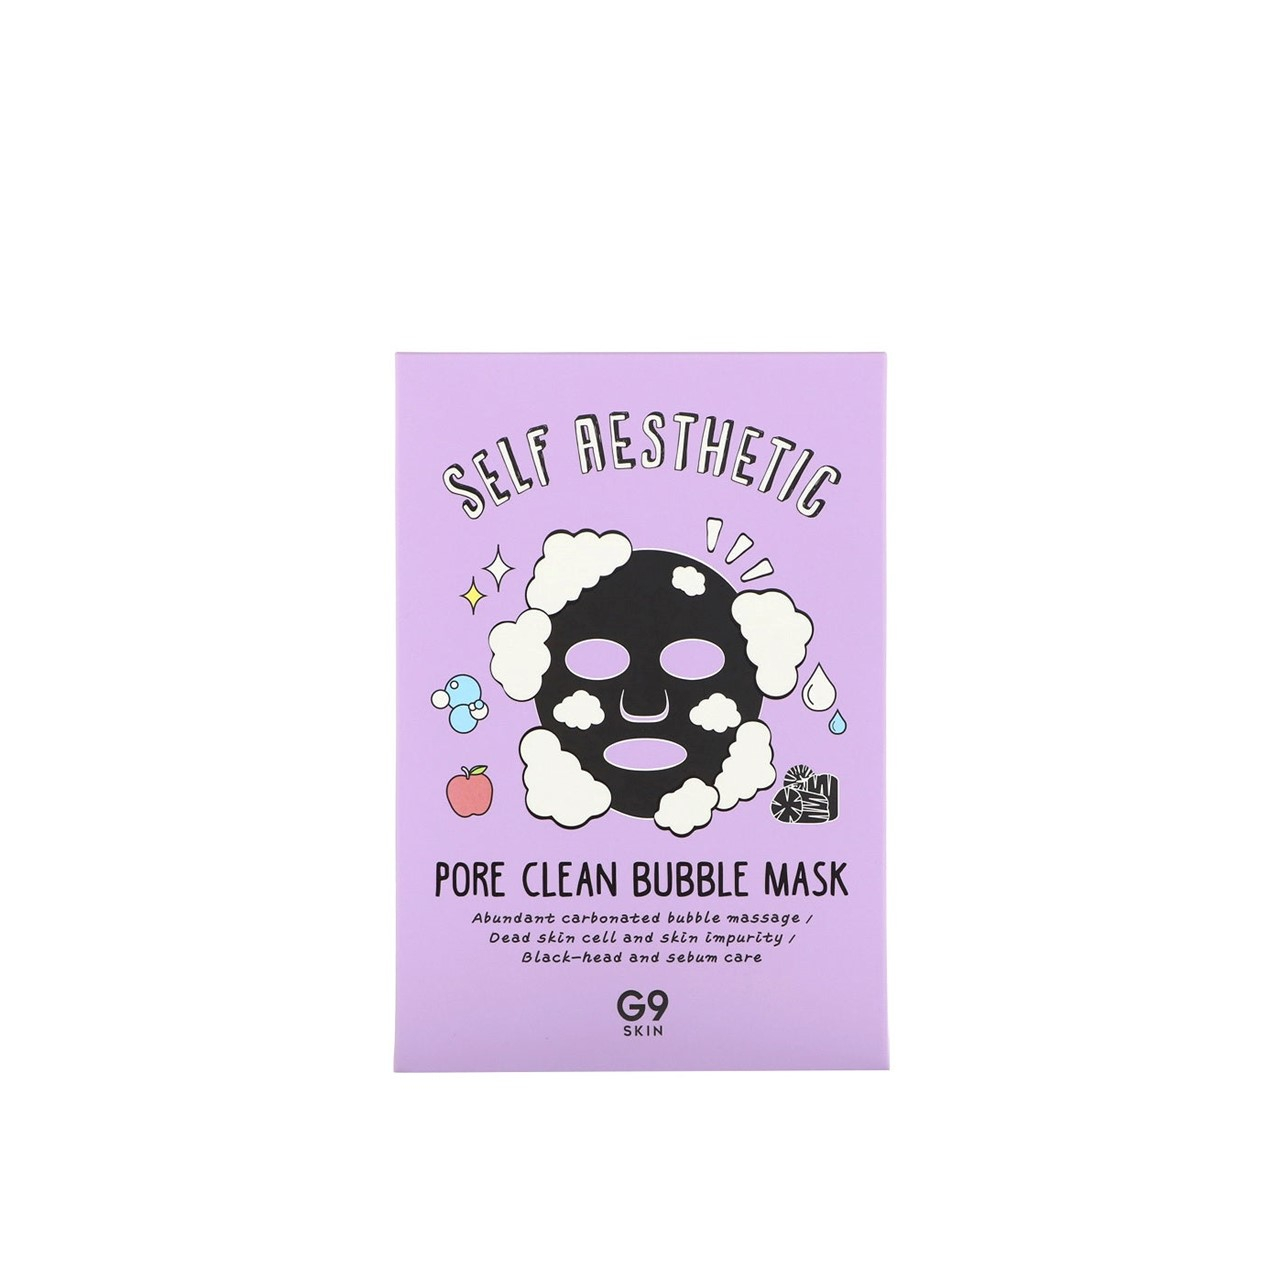 G9 Skin Self Aesthetic Pore Clean Bubble Mask 23g